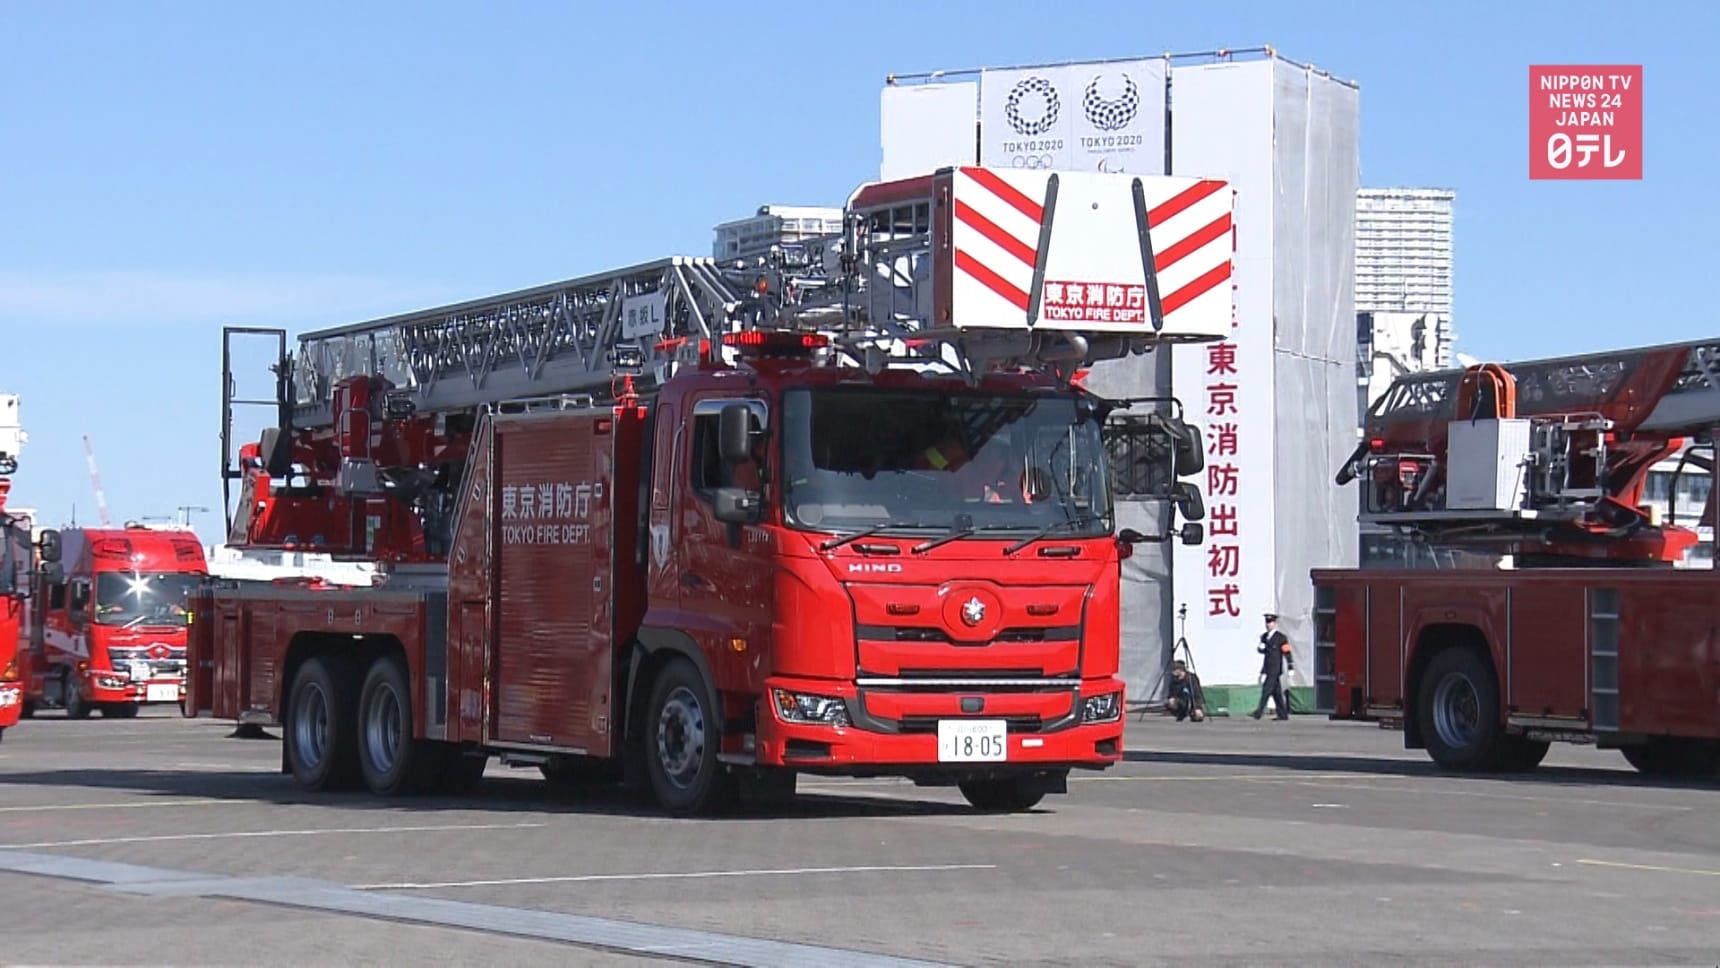 Annual Firefighter Ceremony Heats Up Tokyo